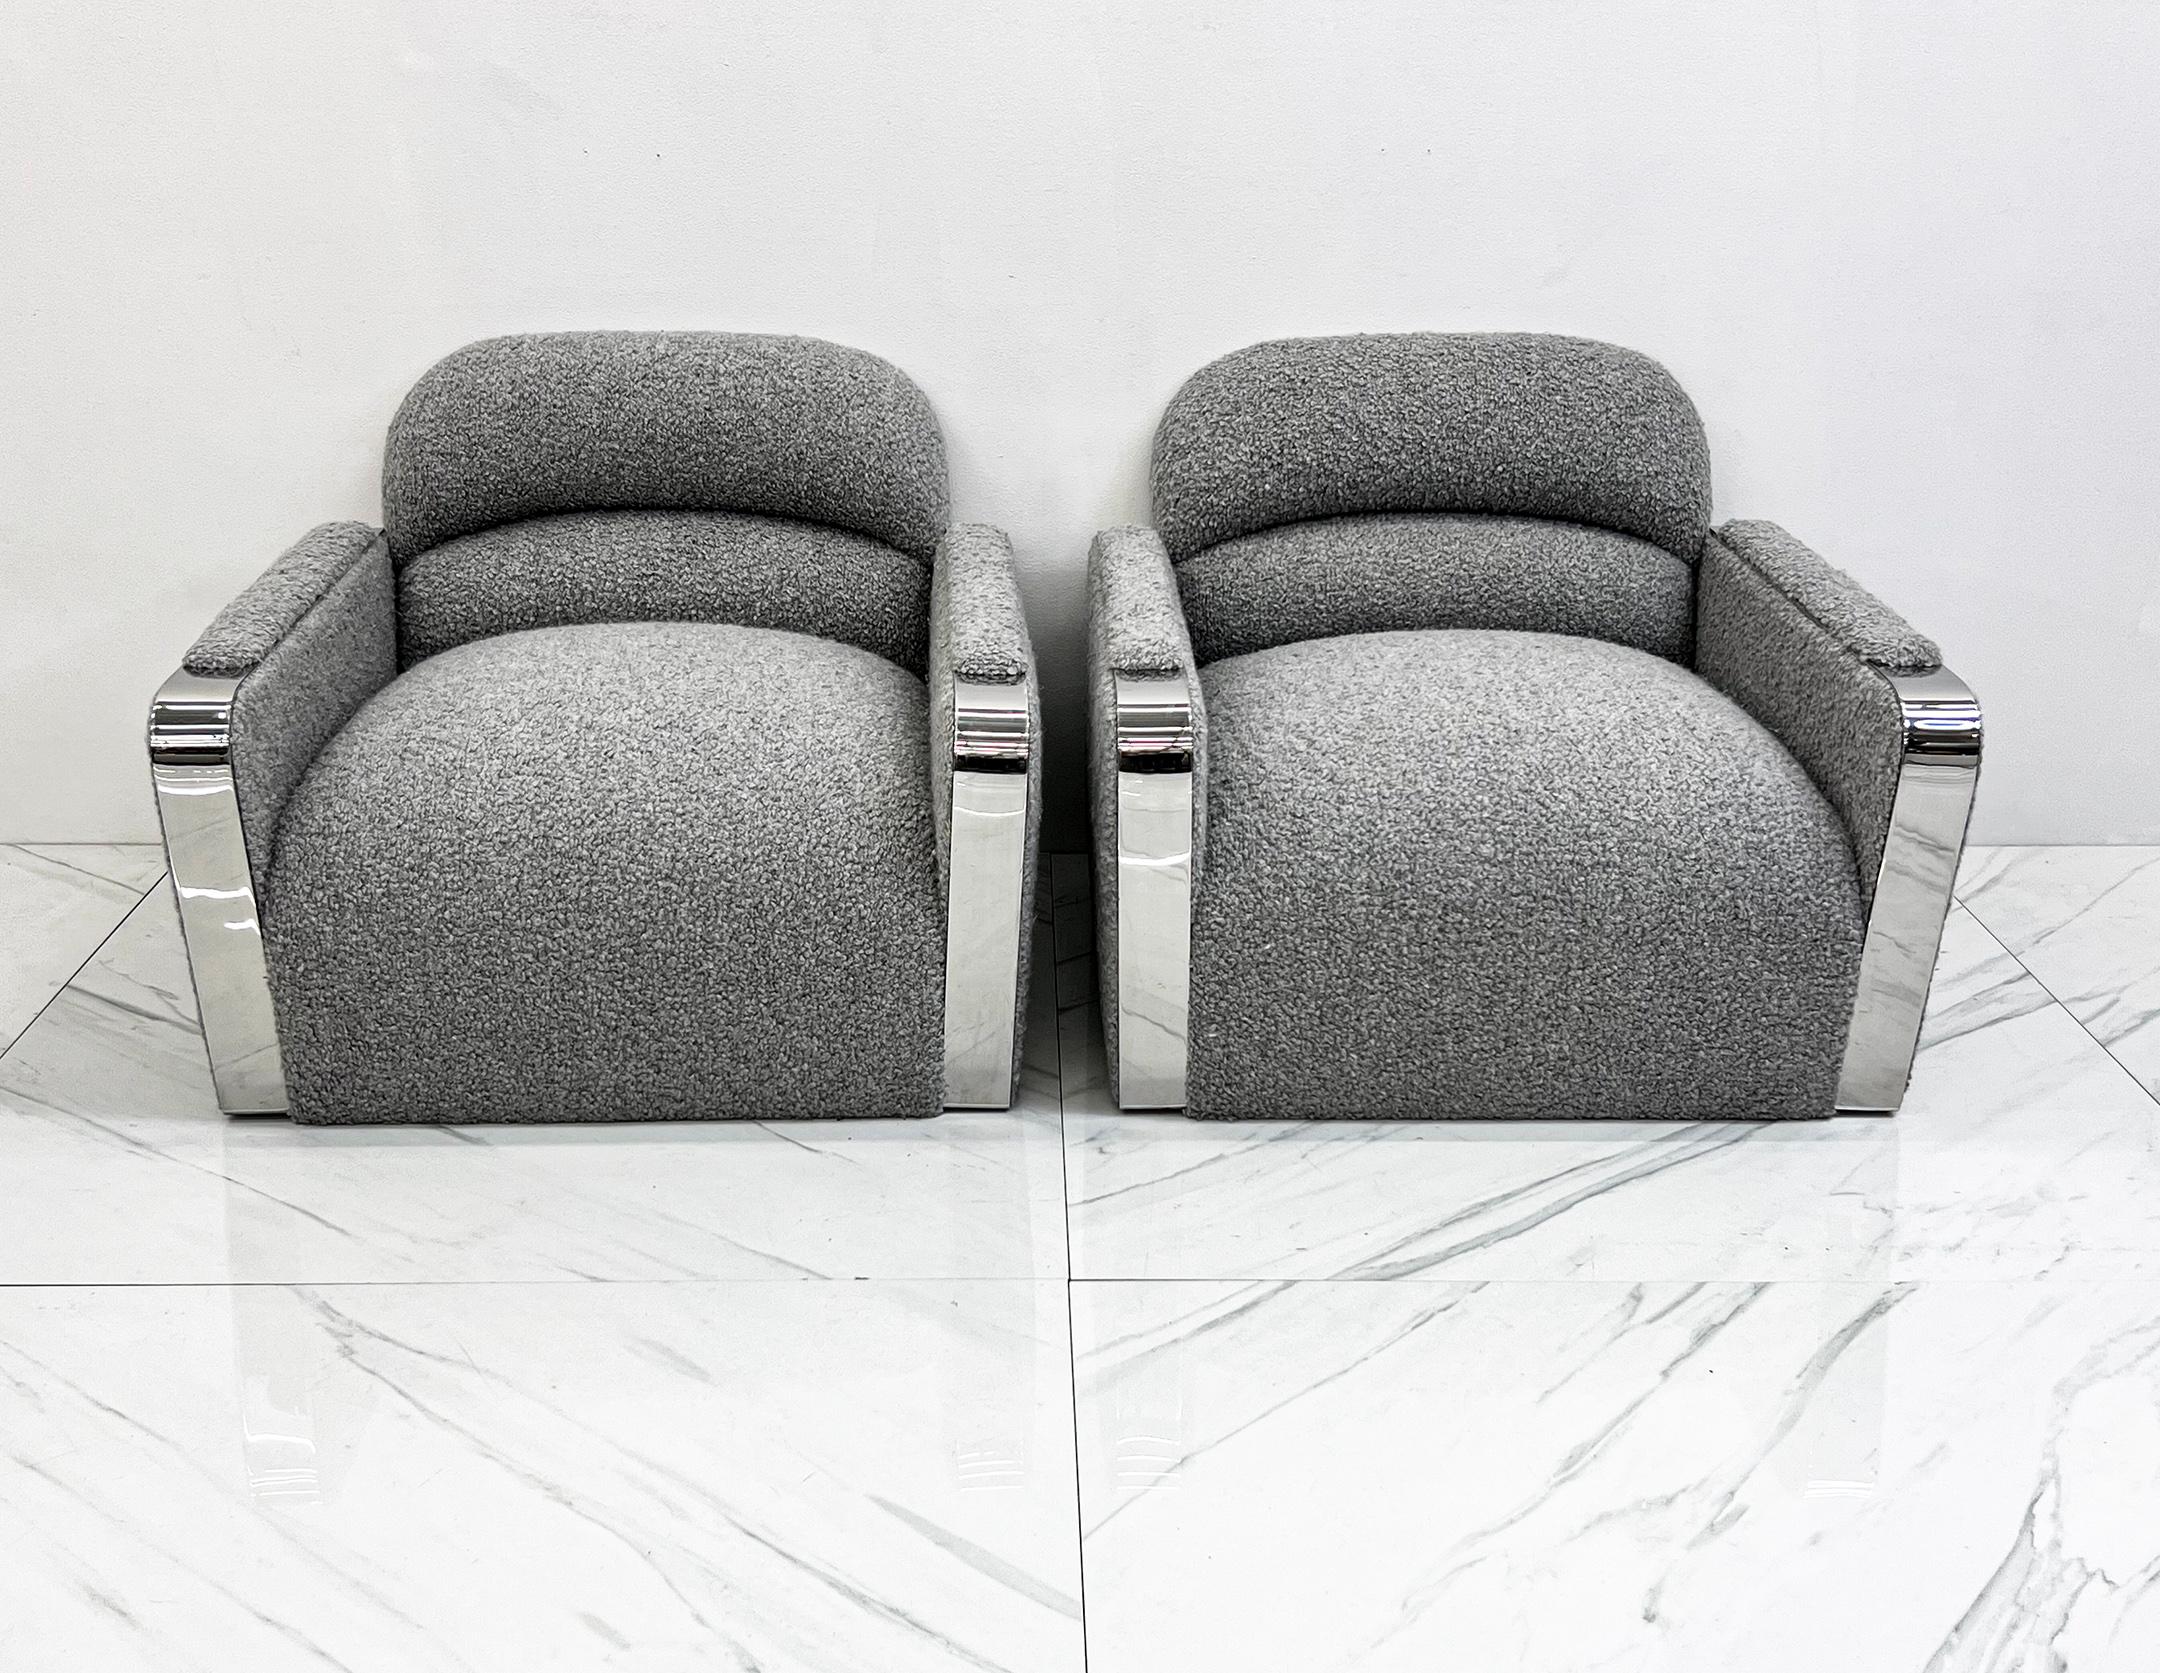 Late 20th Century Lounge Chairs by Stanley Jay Friedman for Brueton, Gray Boucle, 1980's, a Pair